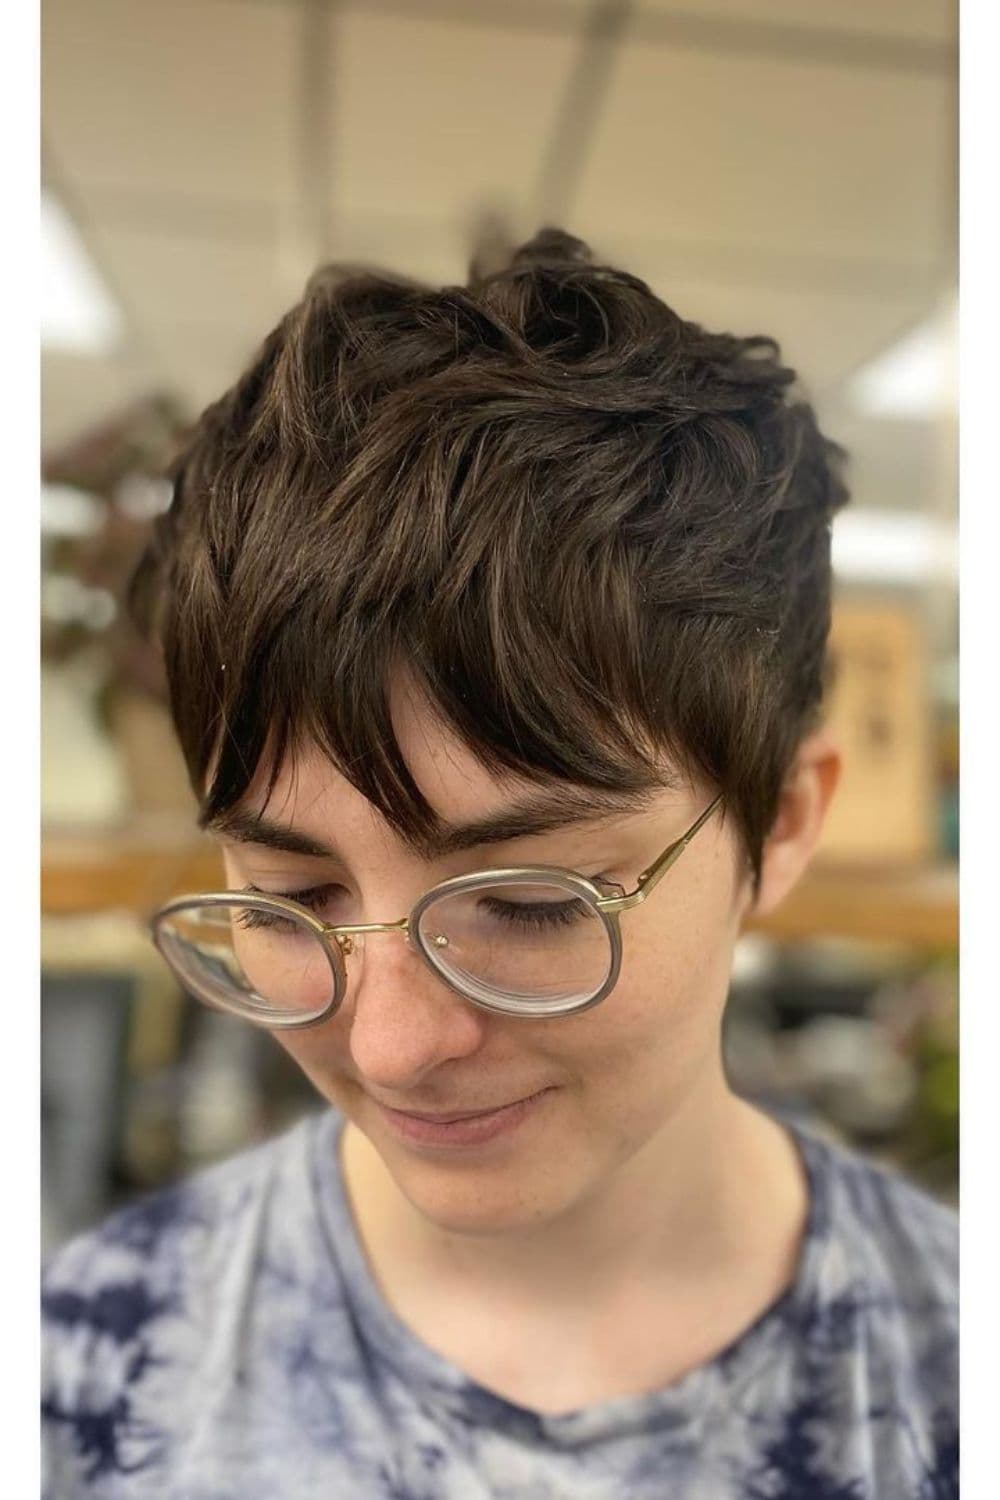 A woman wearing eyeglasses with pixie cut with wavy bangs.